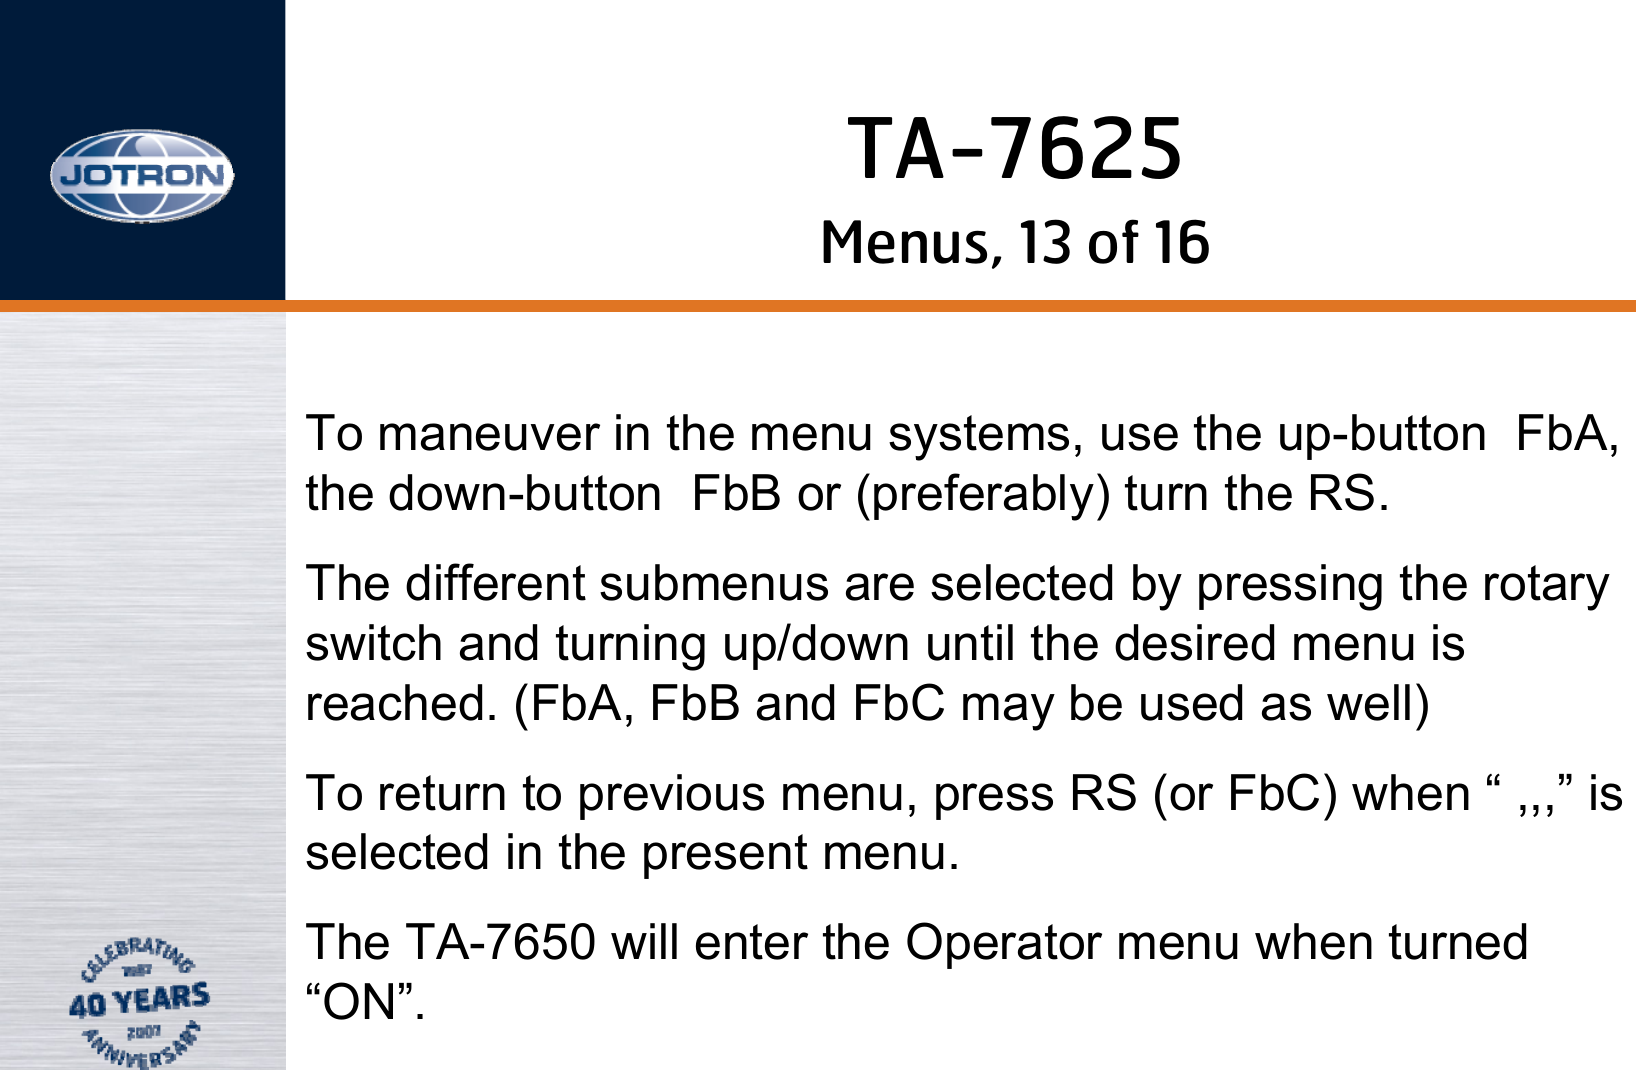 Menus, 13 of 16To maneuver in the menu systems, use the up-button  FbA, the down-button  FbB or (preferably) turn the RS. The different submenus are selected by pressing the rotary switch and turning up/down until the desired menu is reached. (FbA, FbB and FbC may be used as well)To return to previous menu, press RS (or FbC) when “ ,,,” is selected in the present menu.The TA-7650 will enter the Operator menu when turned “ON”.TA-7625